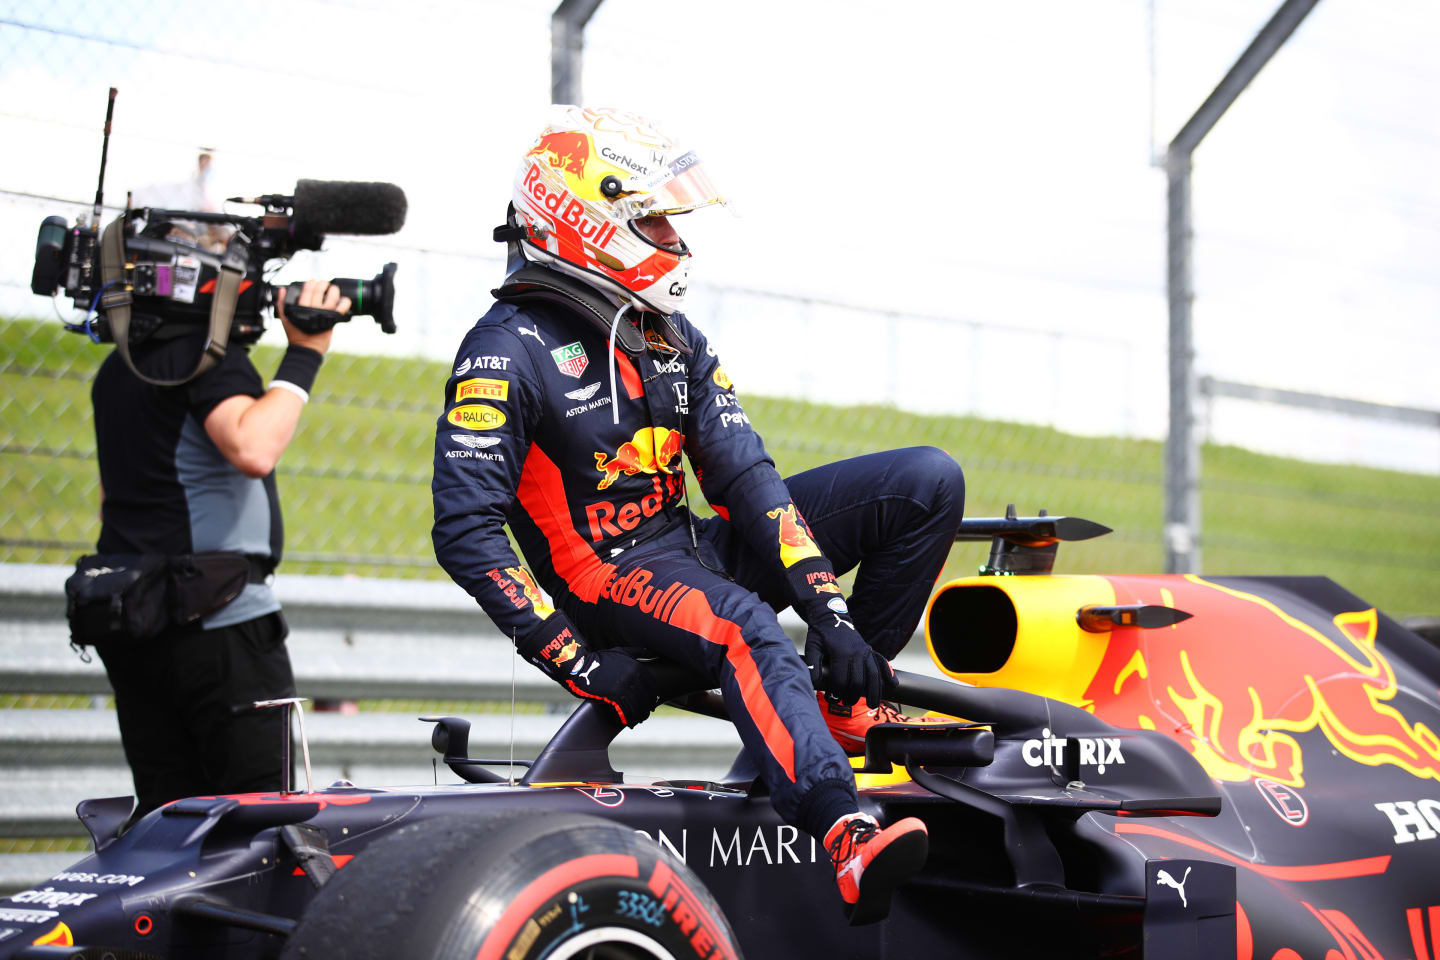 NORTHAMPTON, ENGLAND - AUGUST 02: Max Verstappen of Netherlands and Red Bull Racing climbs out of